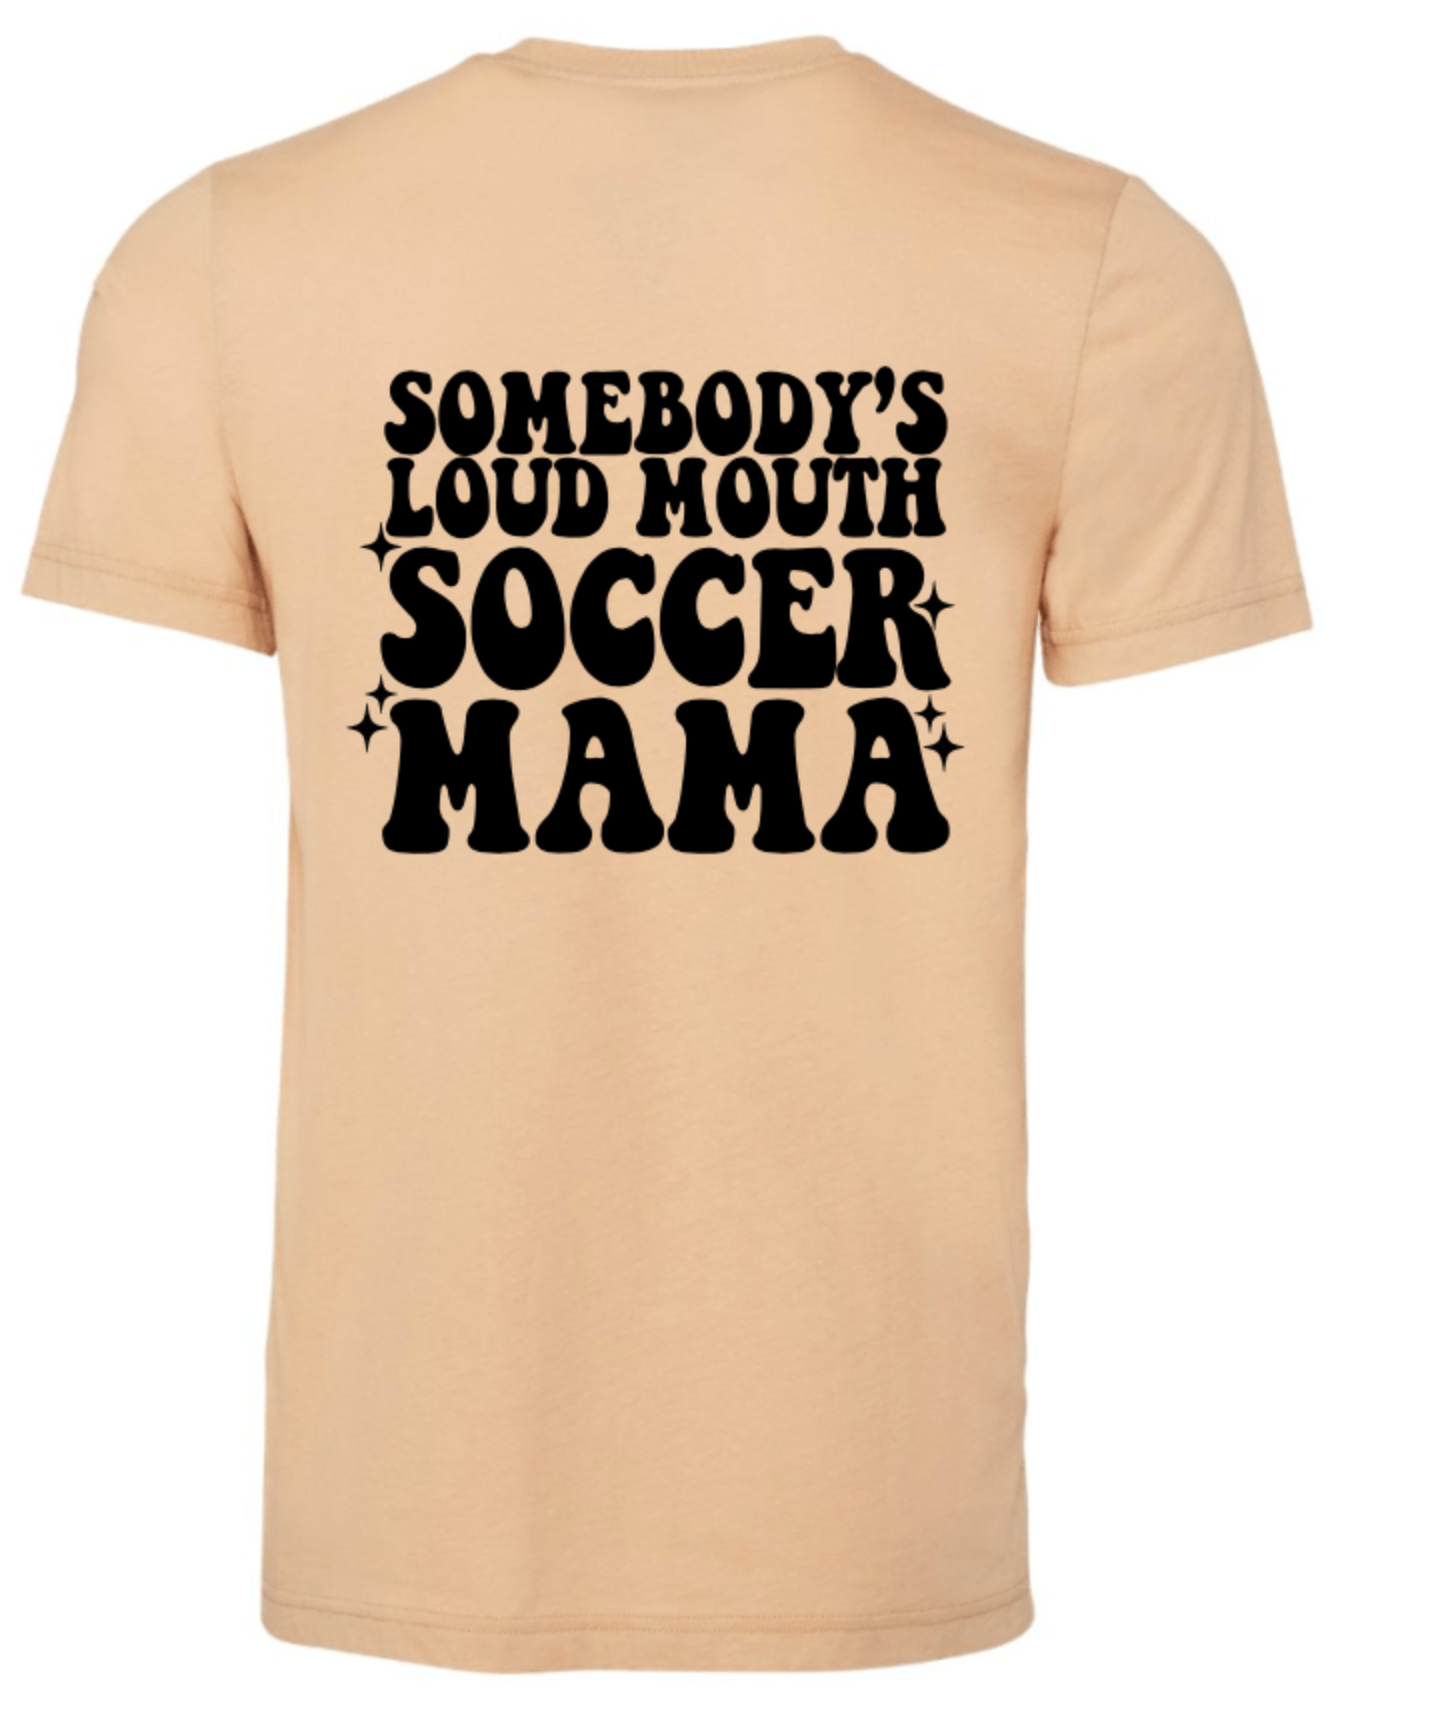 SOMEBODY'S LOUD MOUTH SOCCER MAMA